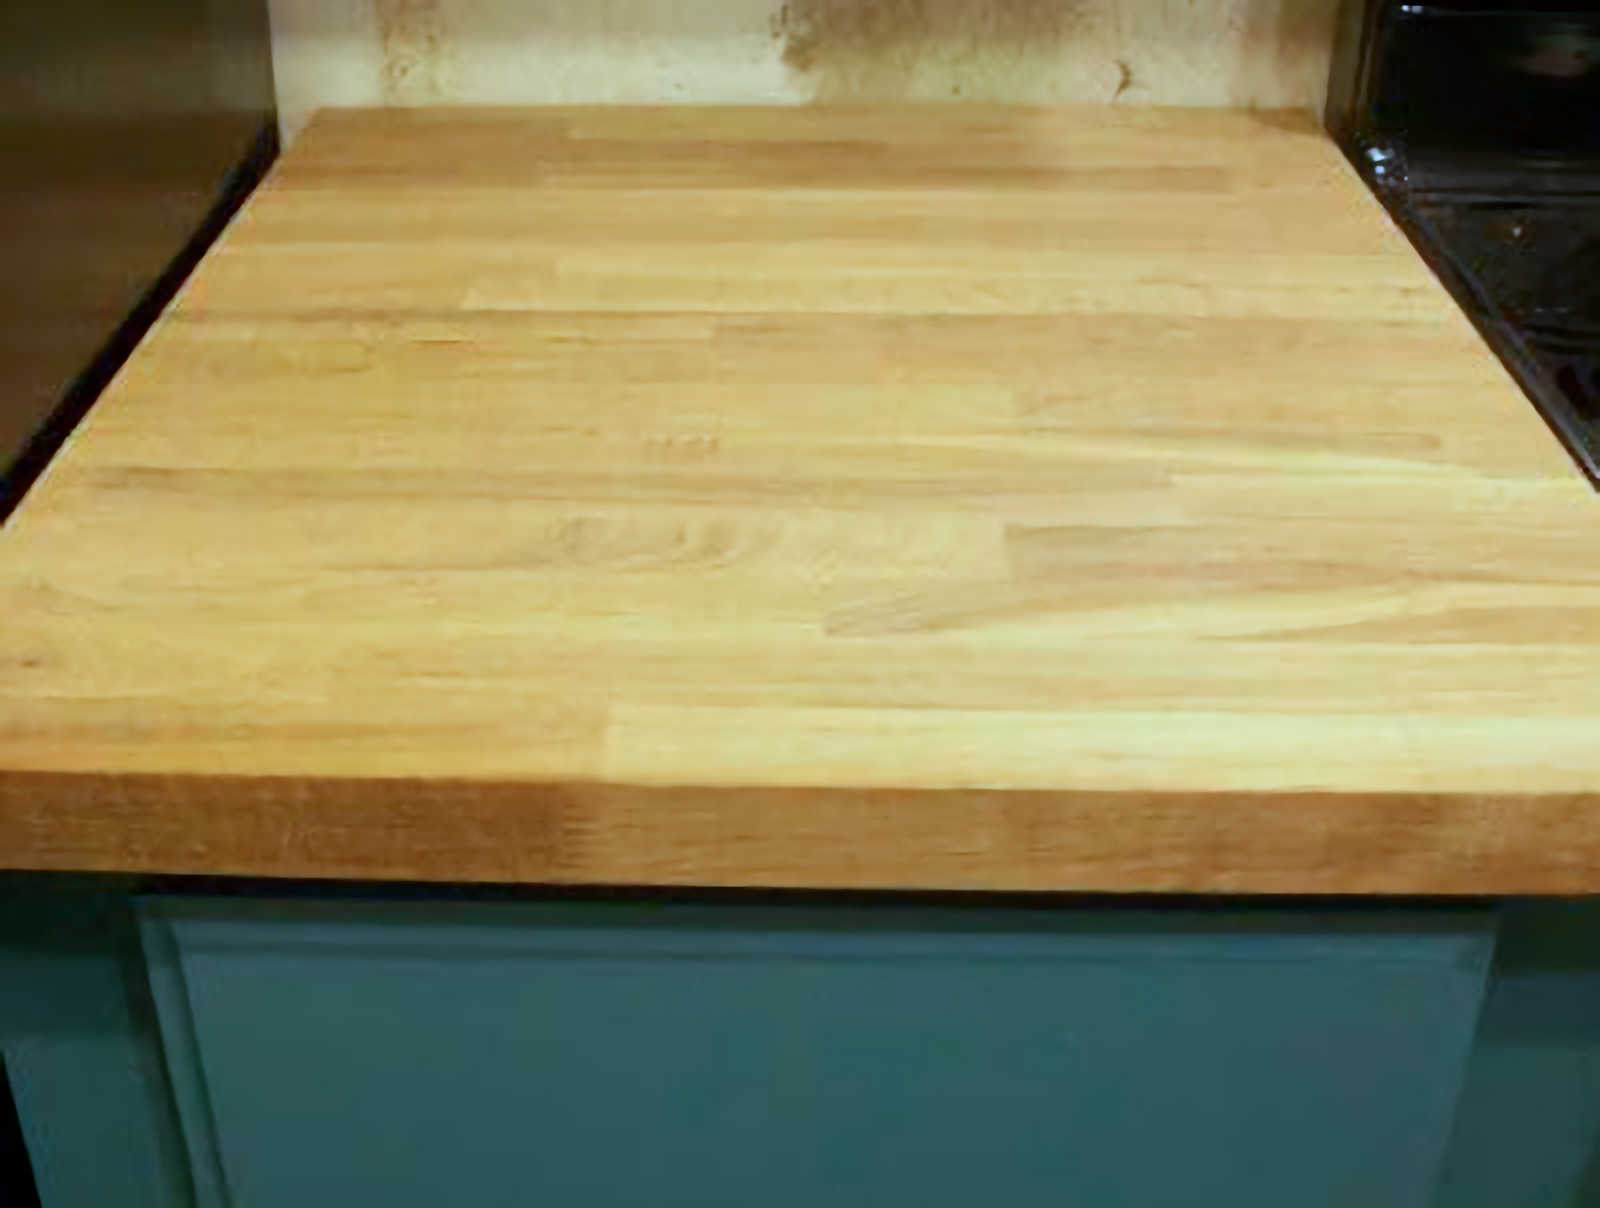 My new IKEA Numerar oak butcher block countertops without any finish on them -- right out of the box